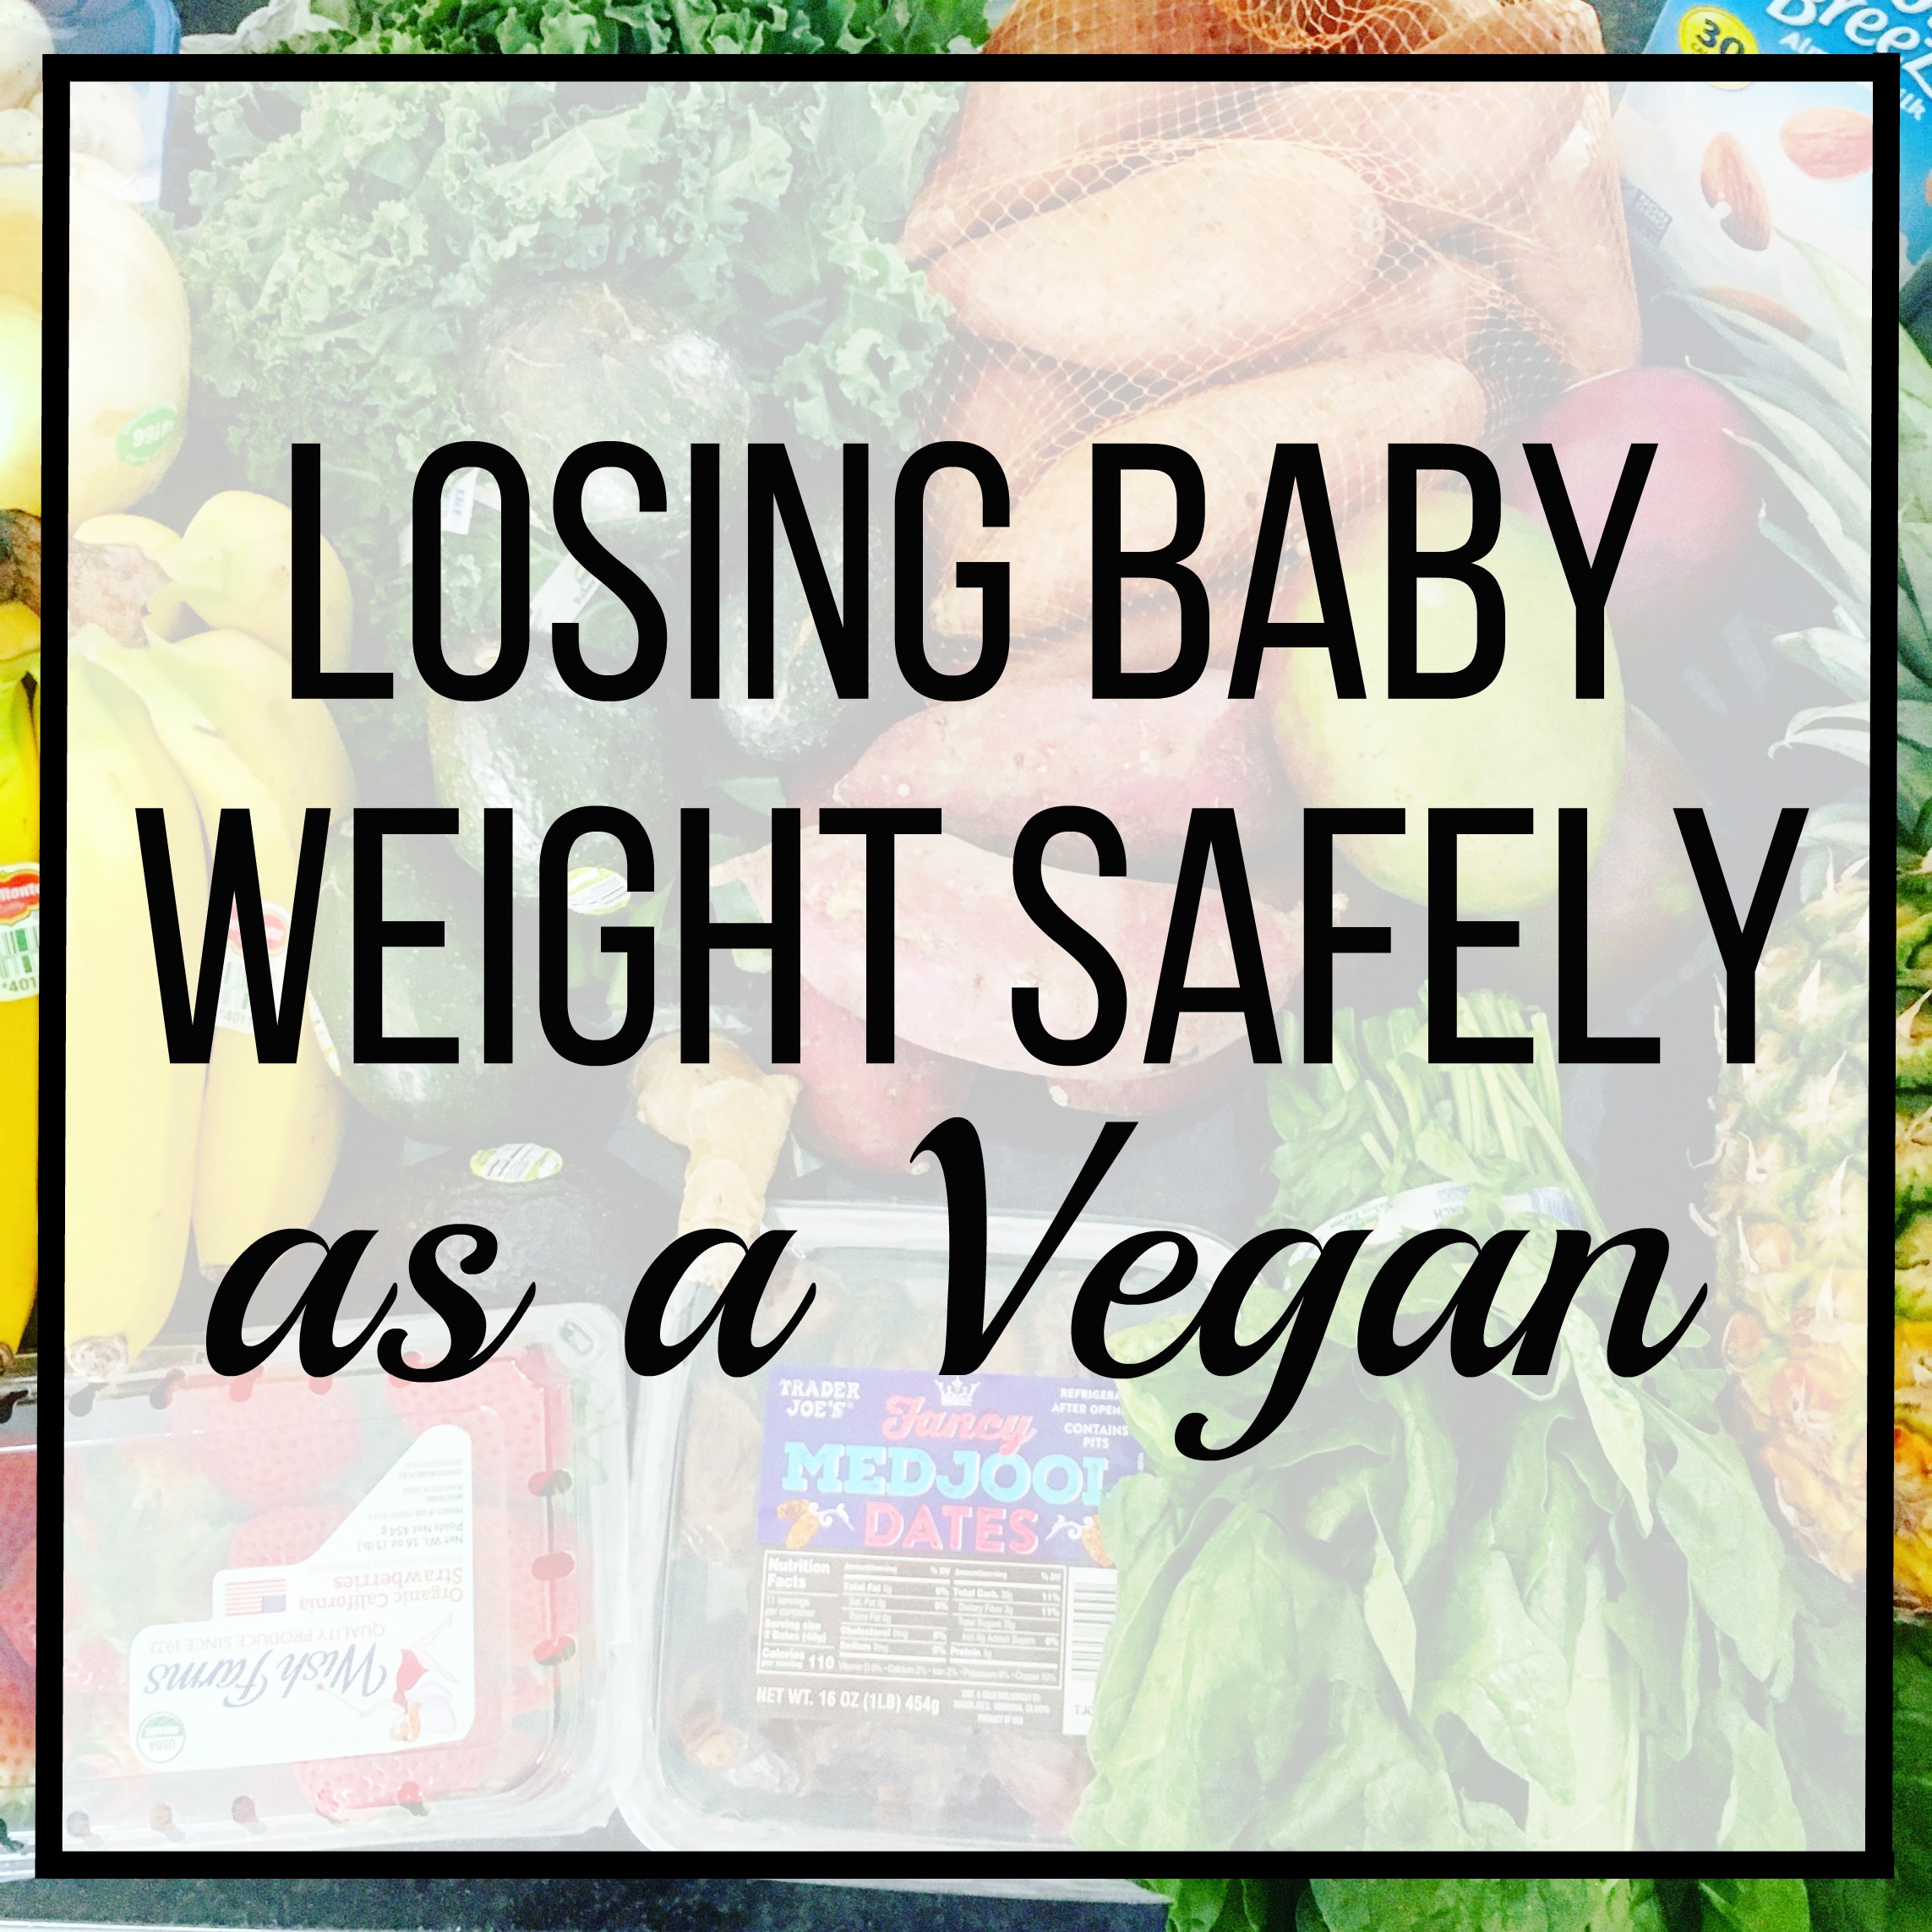 losing baby weight safely as a vegan